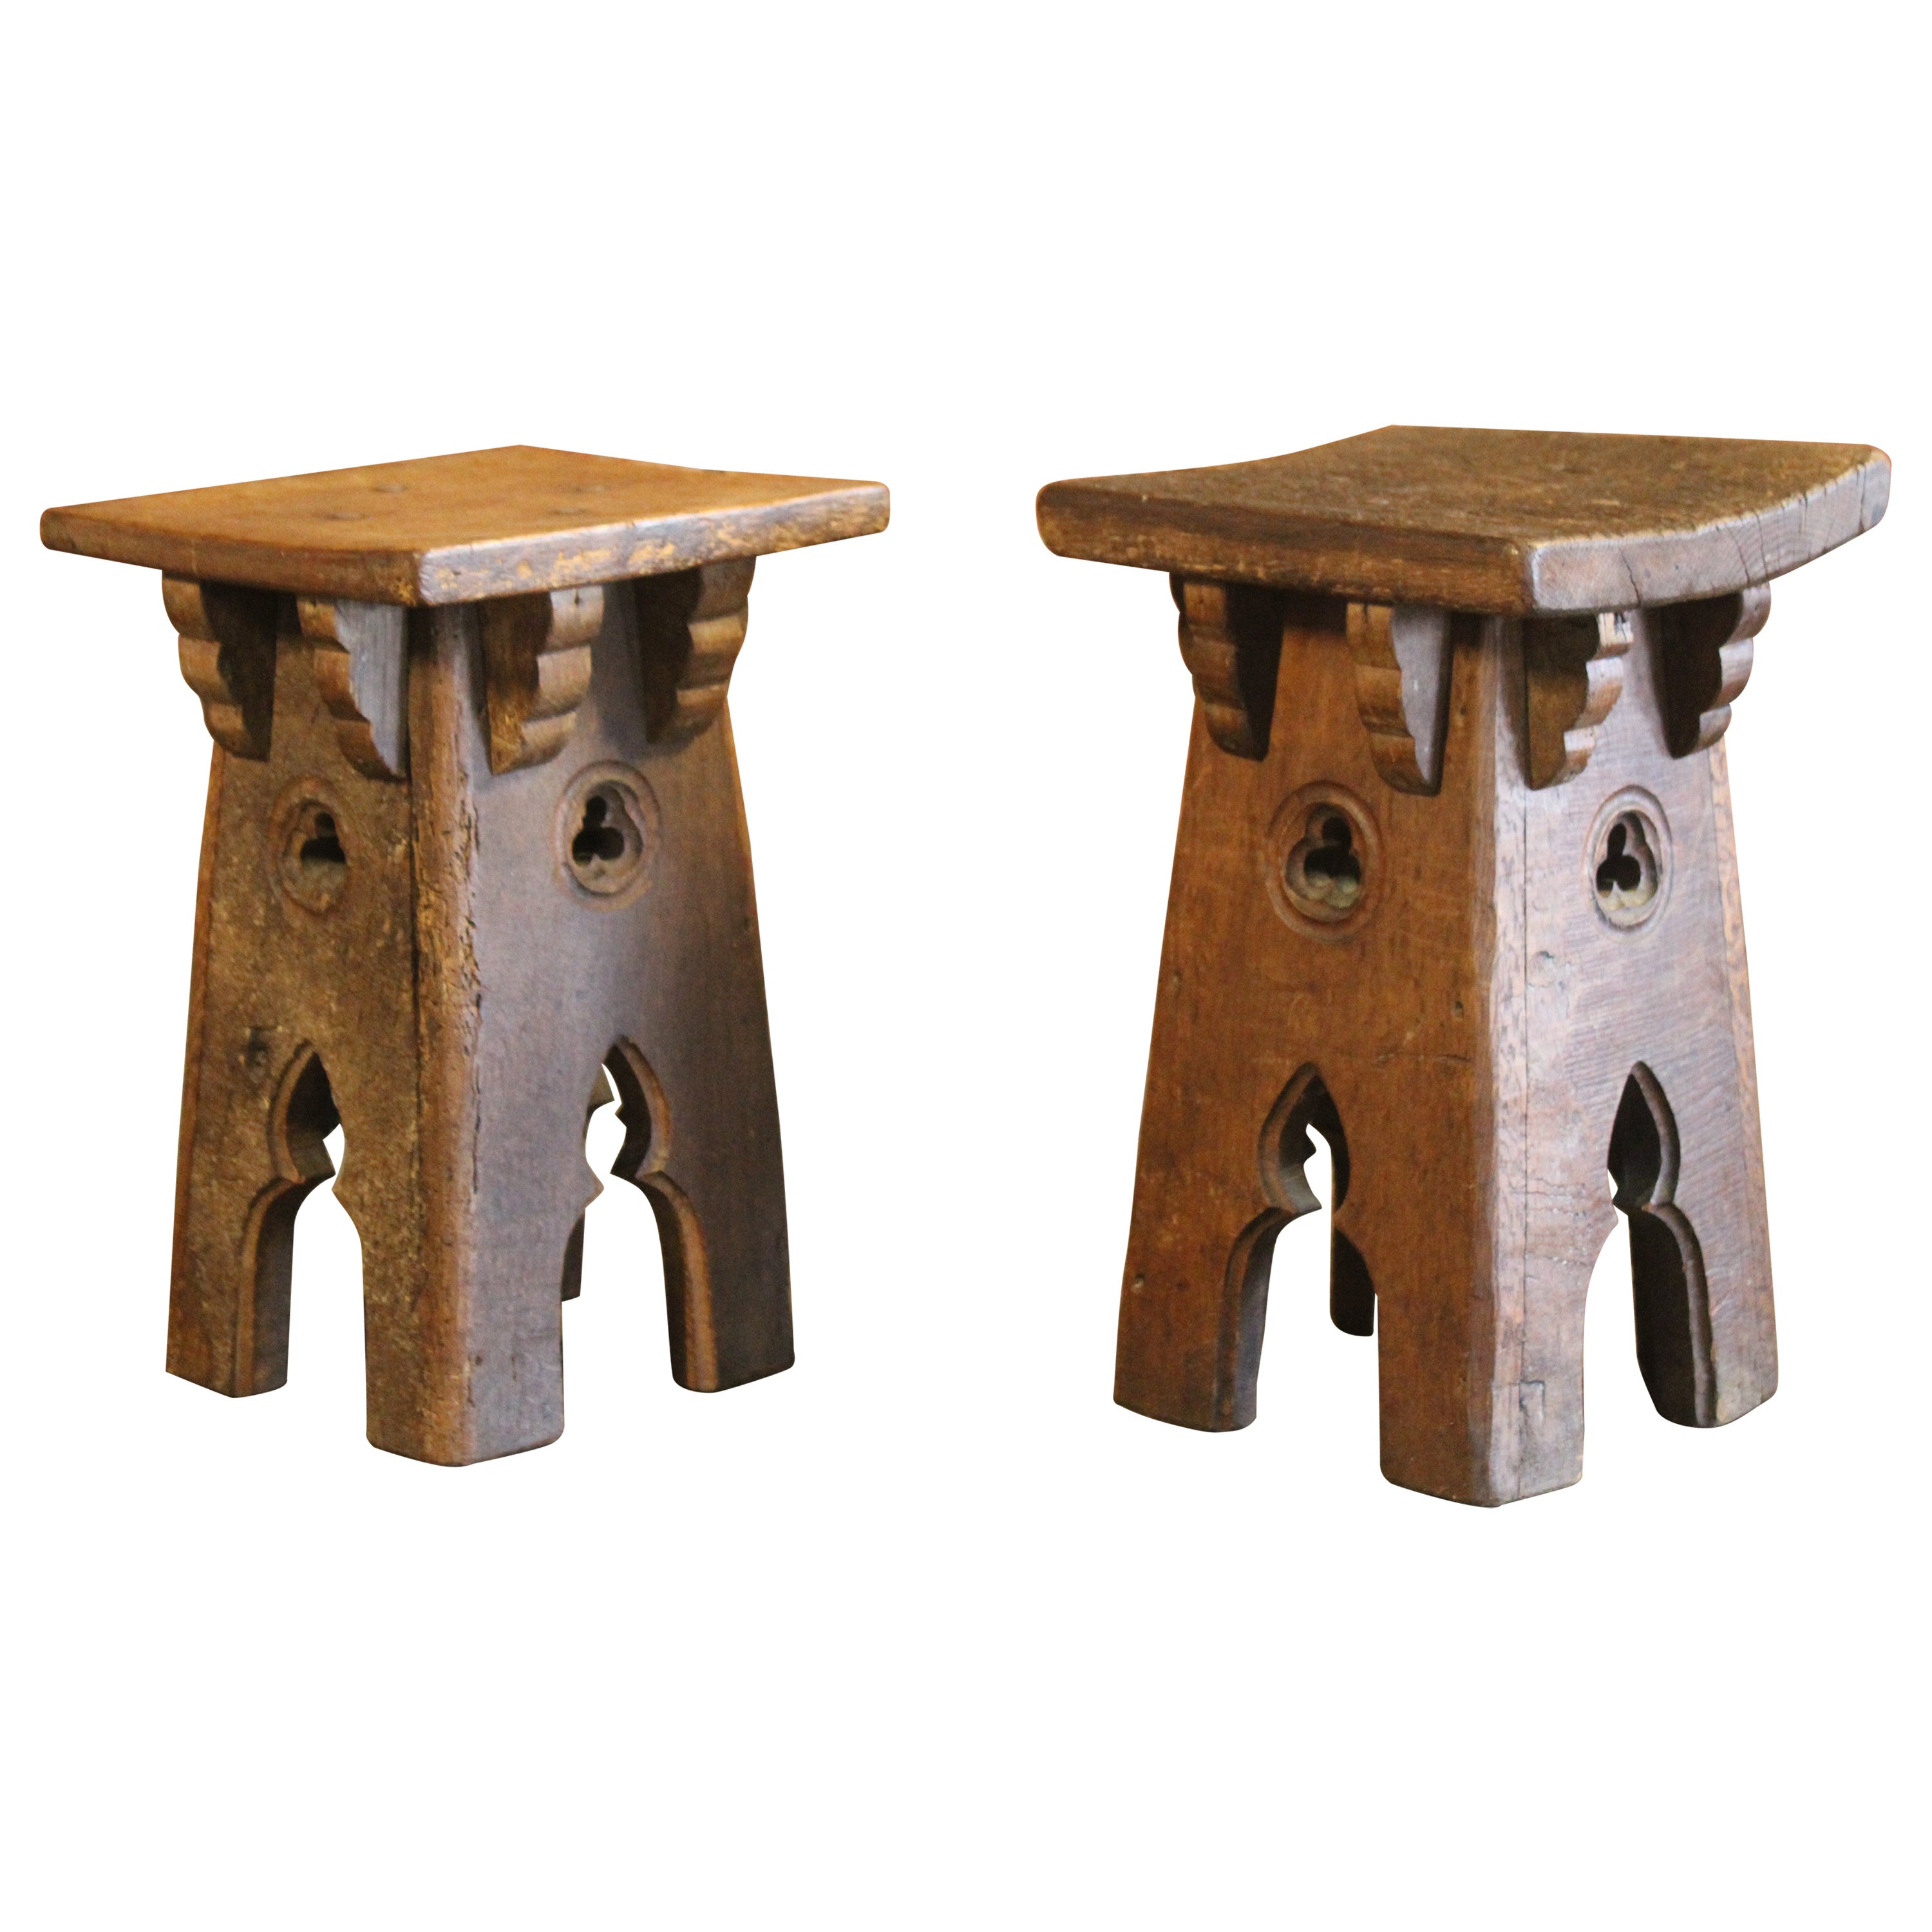 Pair of Antique Oak Gothic Revival French Stools